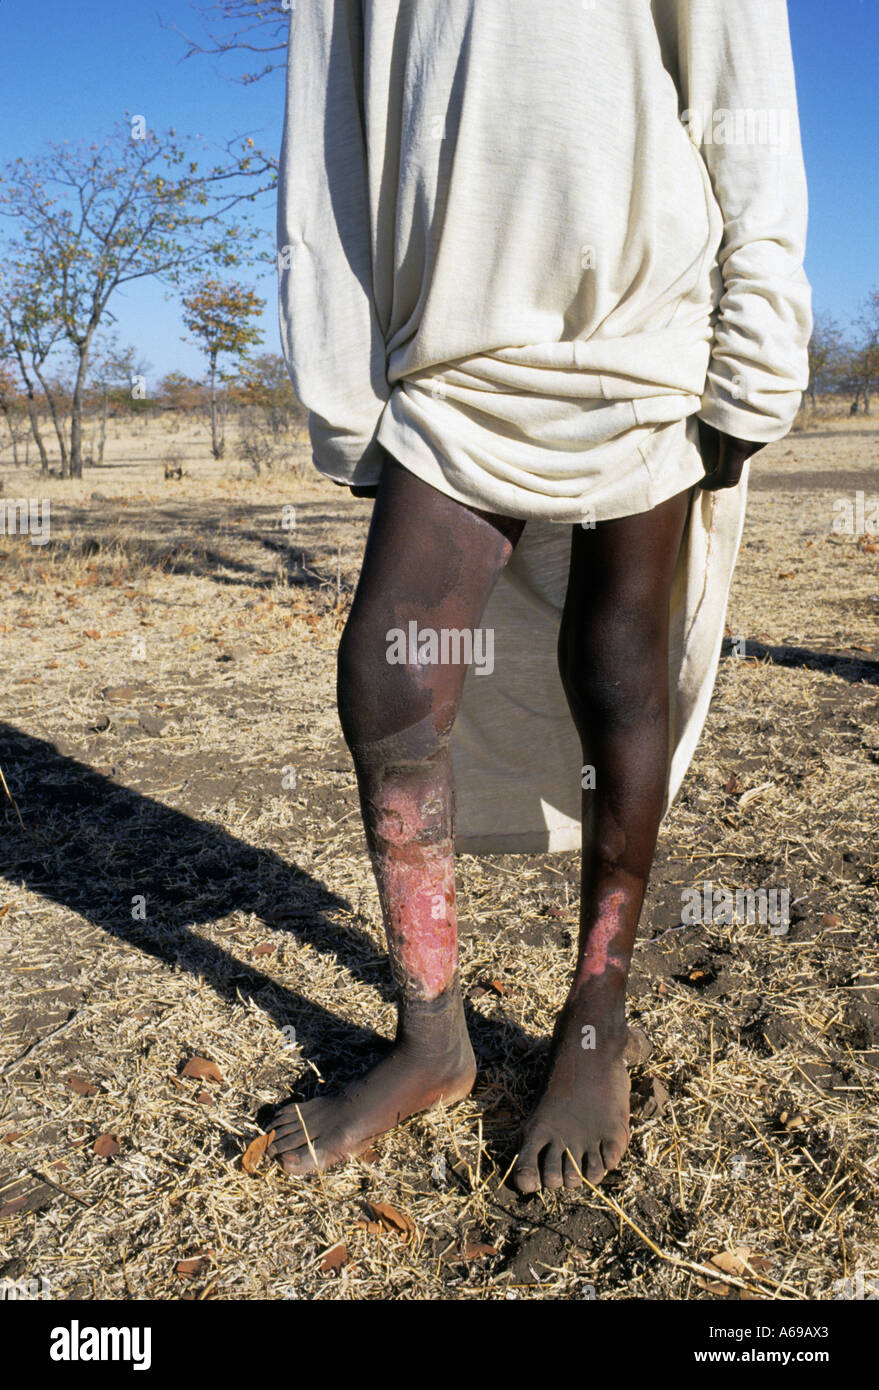 young boy with burns on his legs from falling into a fire. Zimbabwe, Africa Stock Photo